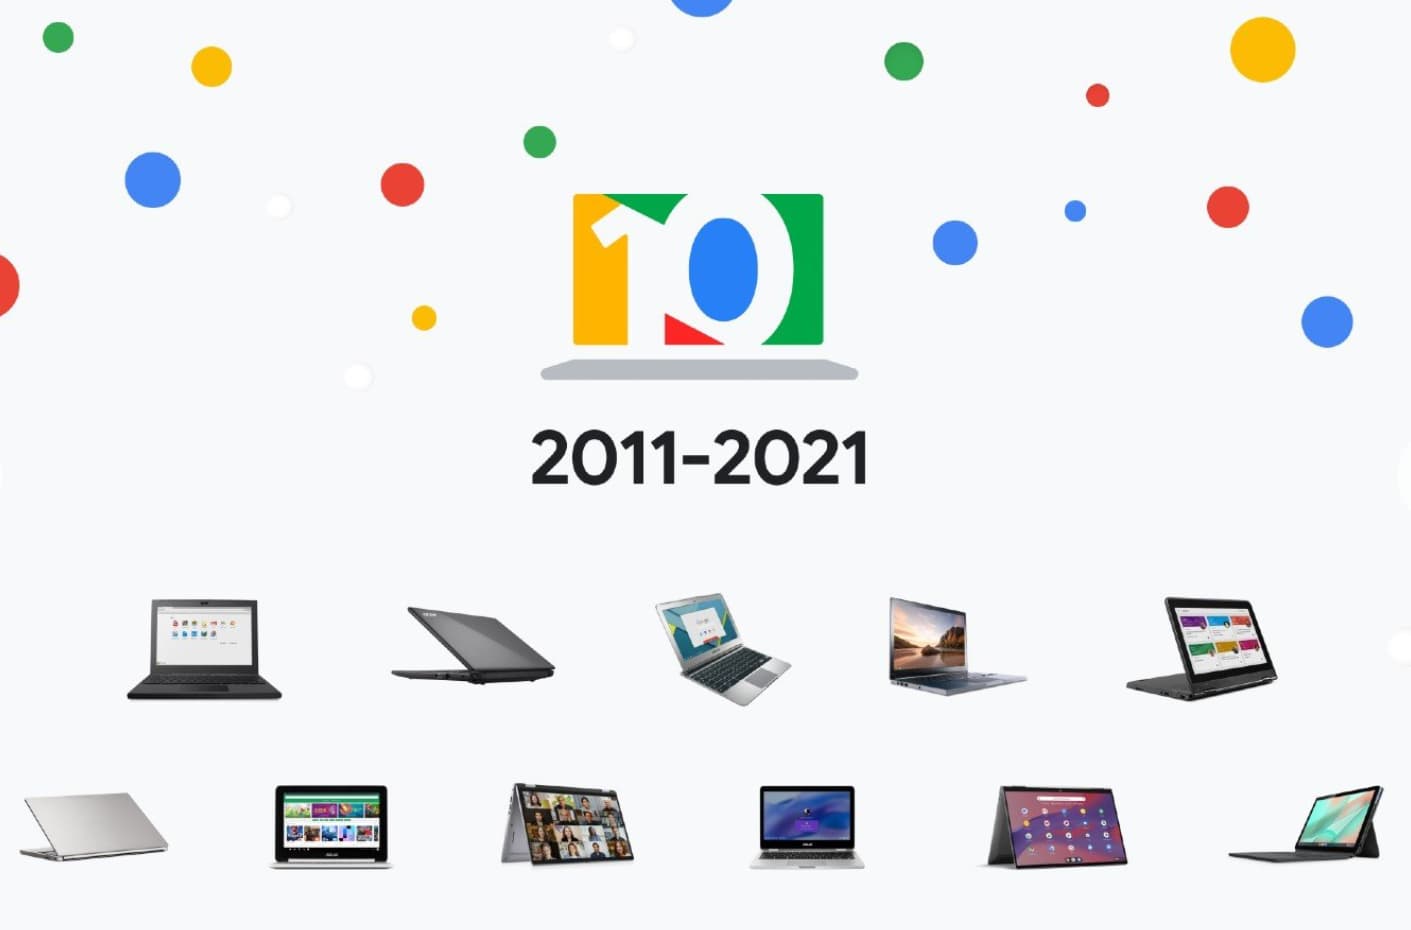 10 years of Chromebooks: My how far they’ve come!